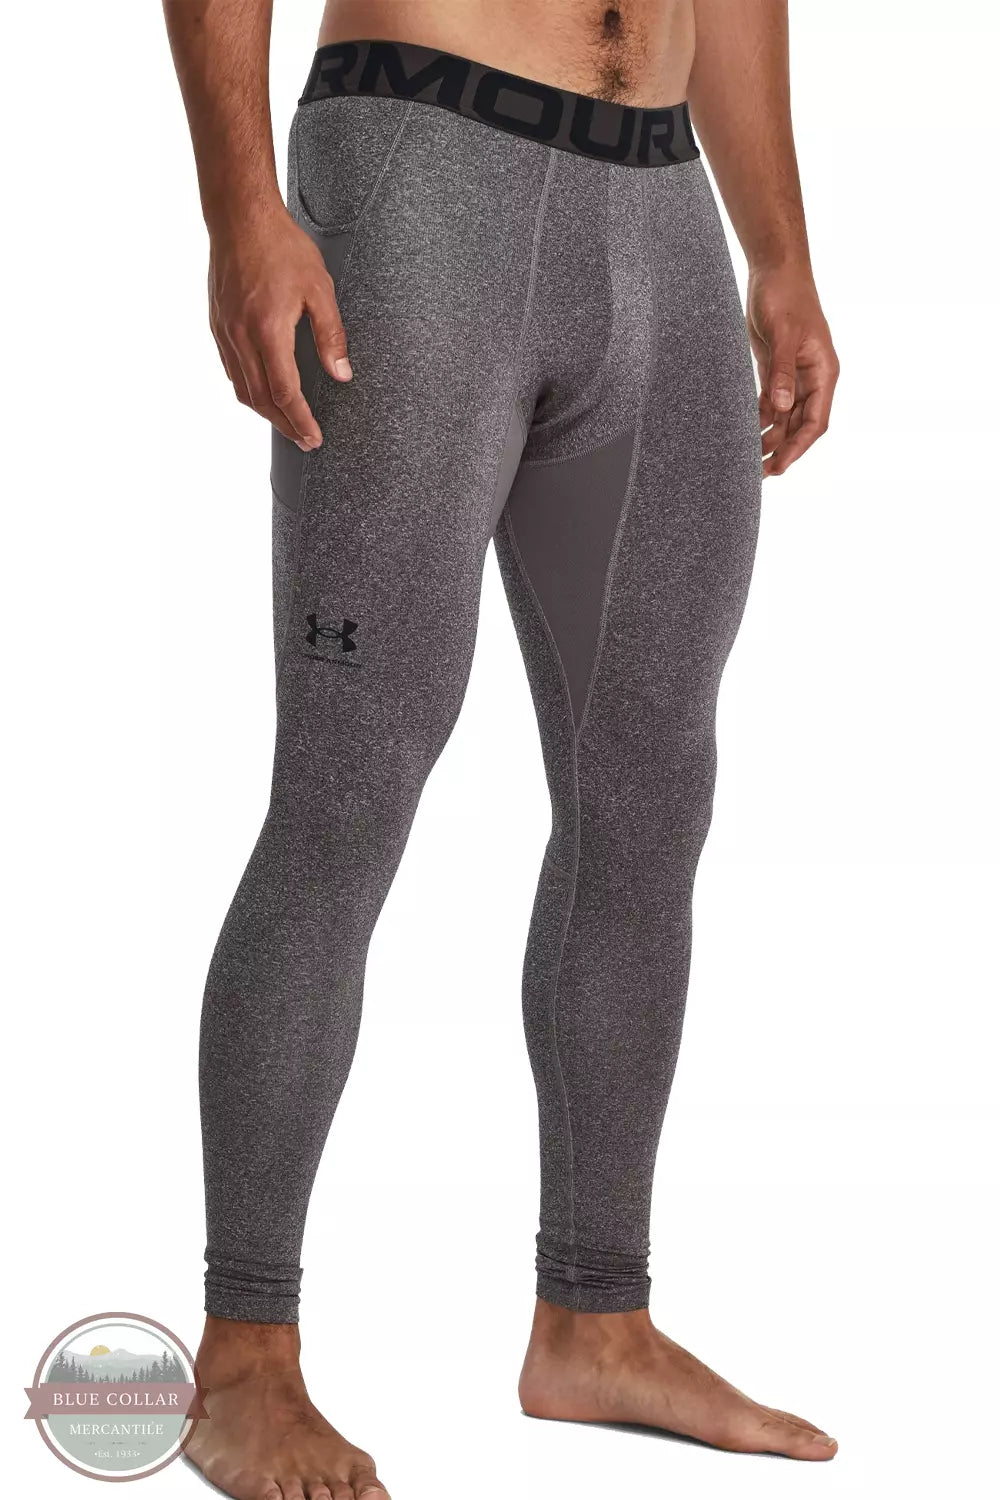 Under Armour Light in ColdGear Charcoal Heather Black Leggings 1366075-020 